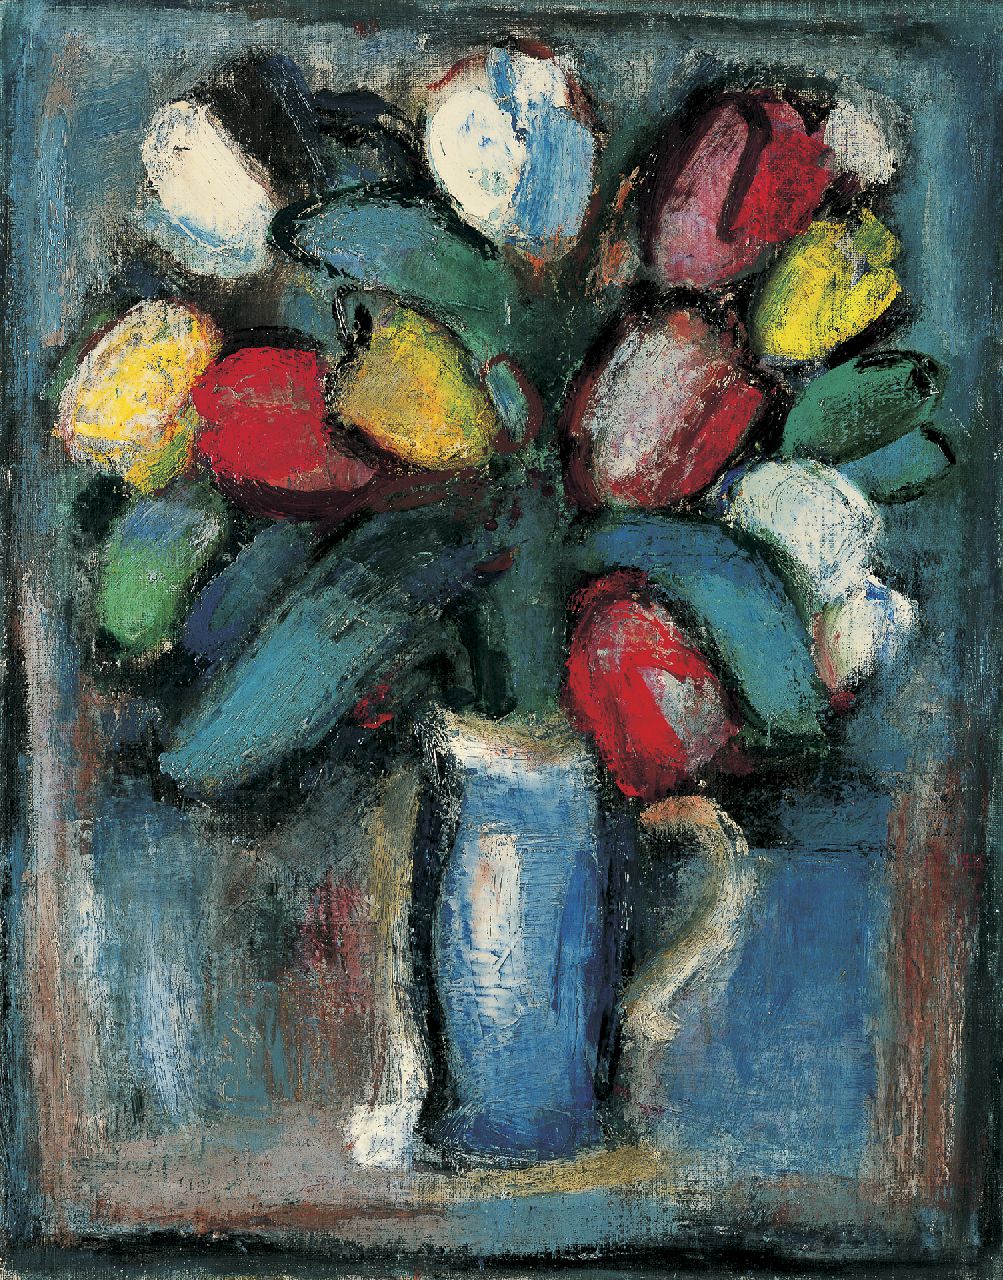 Nanninga J.  | Jacob 'Jaap' Nanninga, Tulips in a vase, oil on canvas 50.5 x 40.5 cm, signed l.r. and painted circa 1946-1948